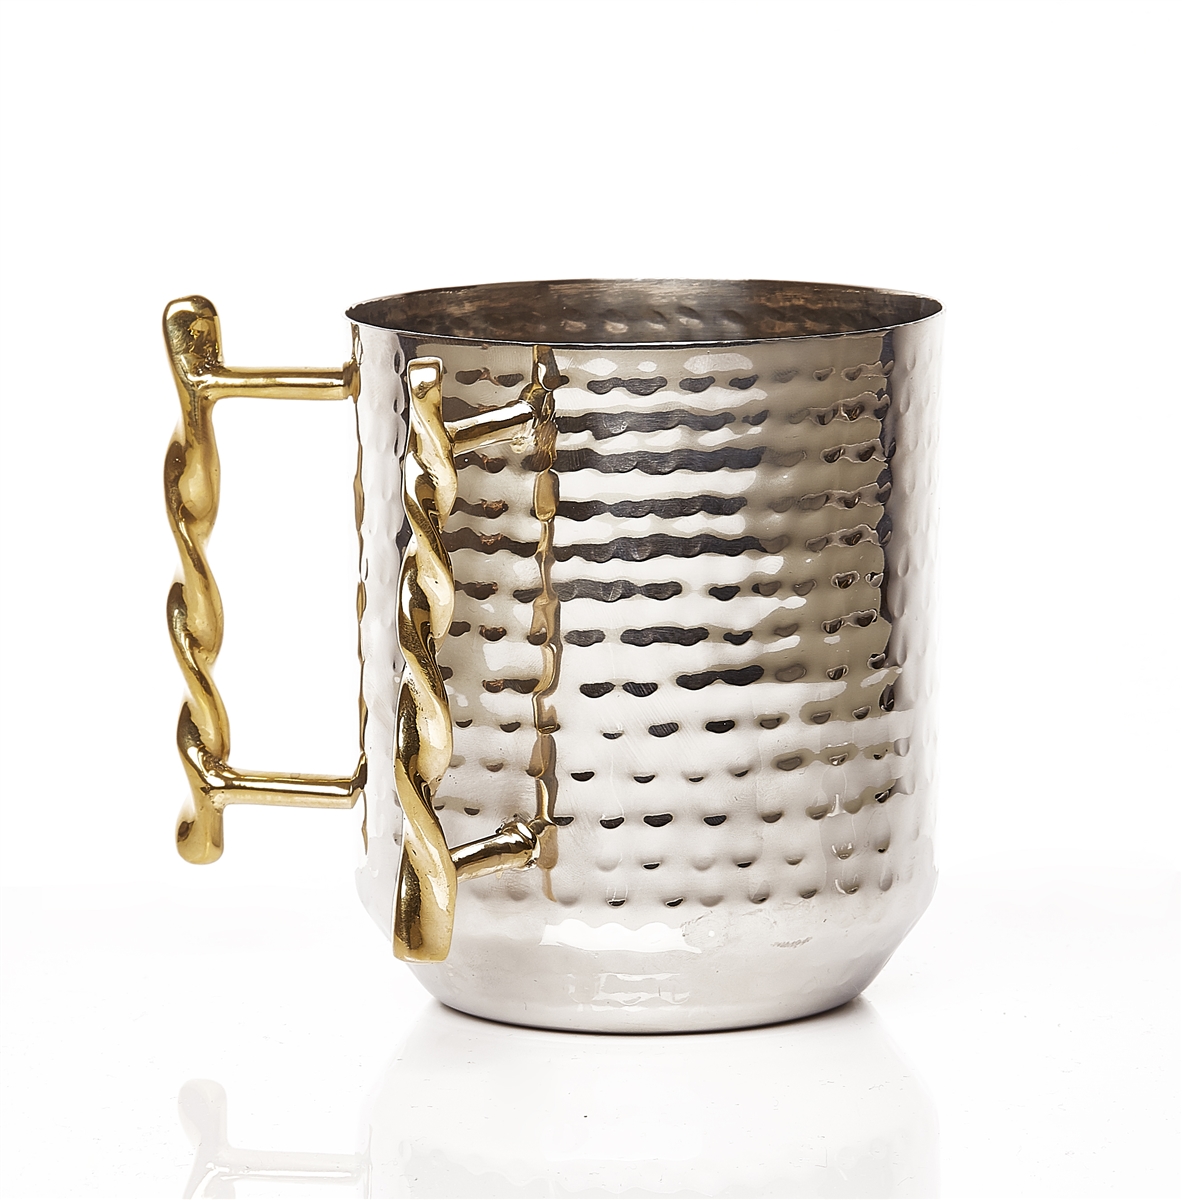 Stainless Steel Washing Cup with Brass Handle